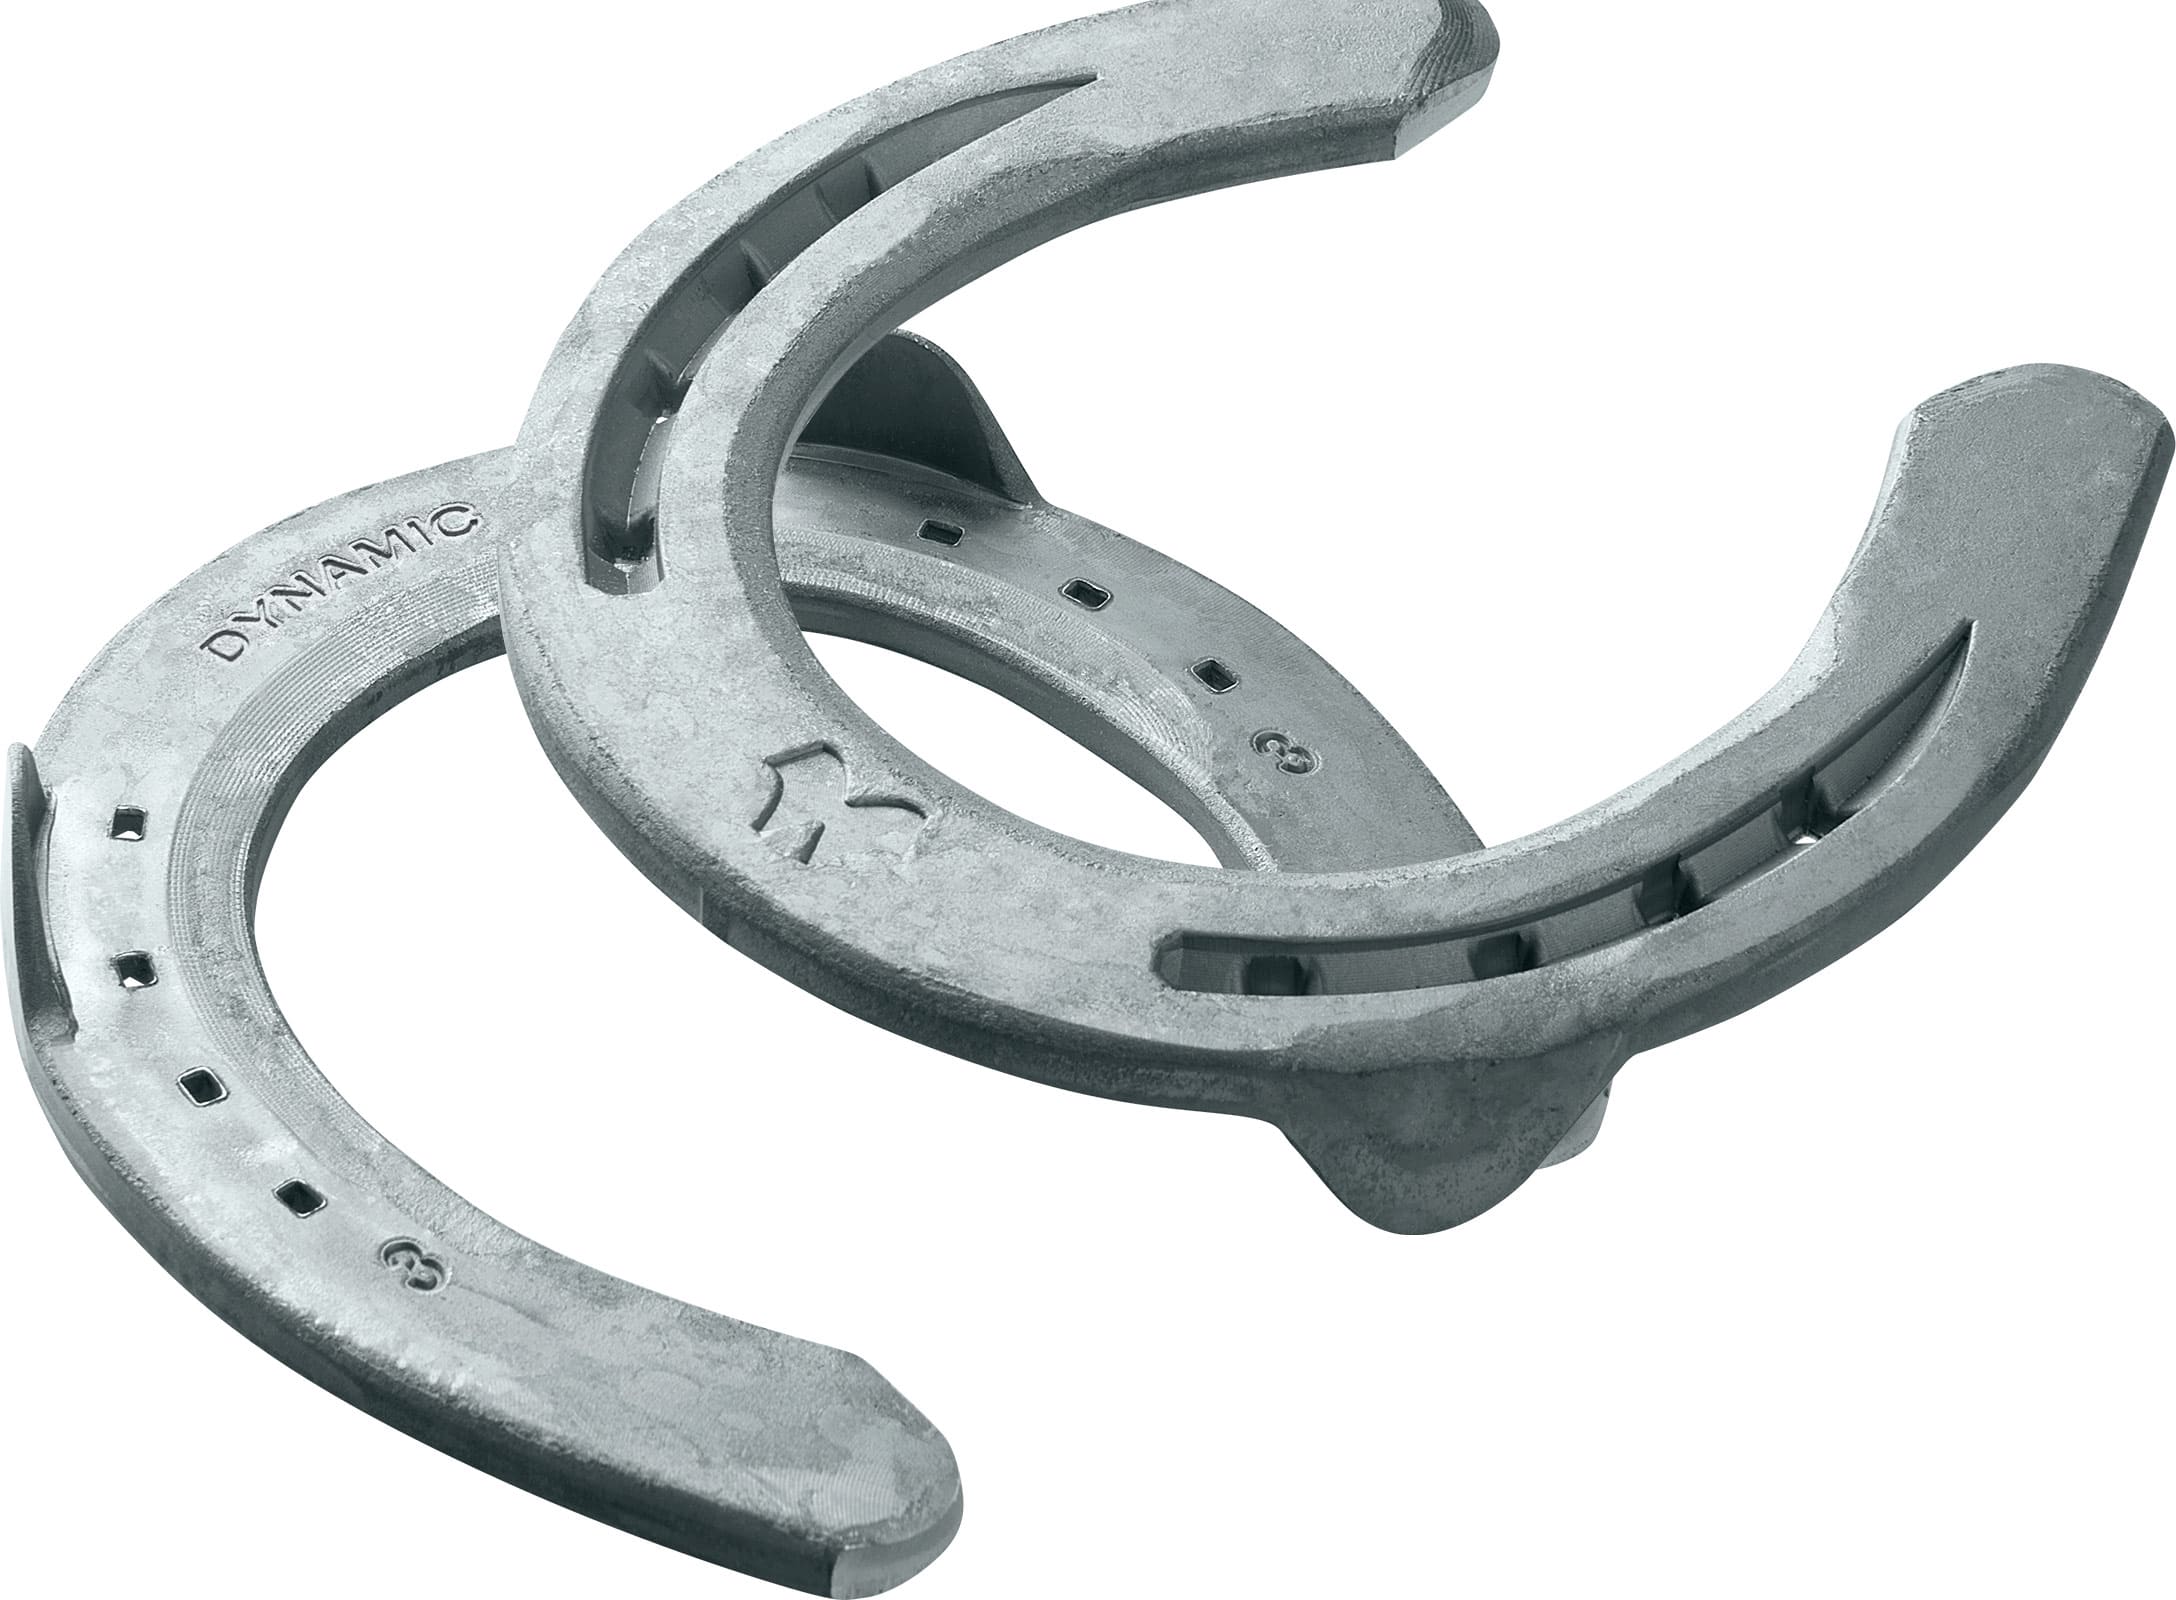 Mustad DynamIc horseshoes, front with side clips, 3D view